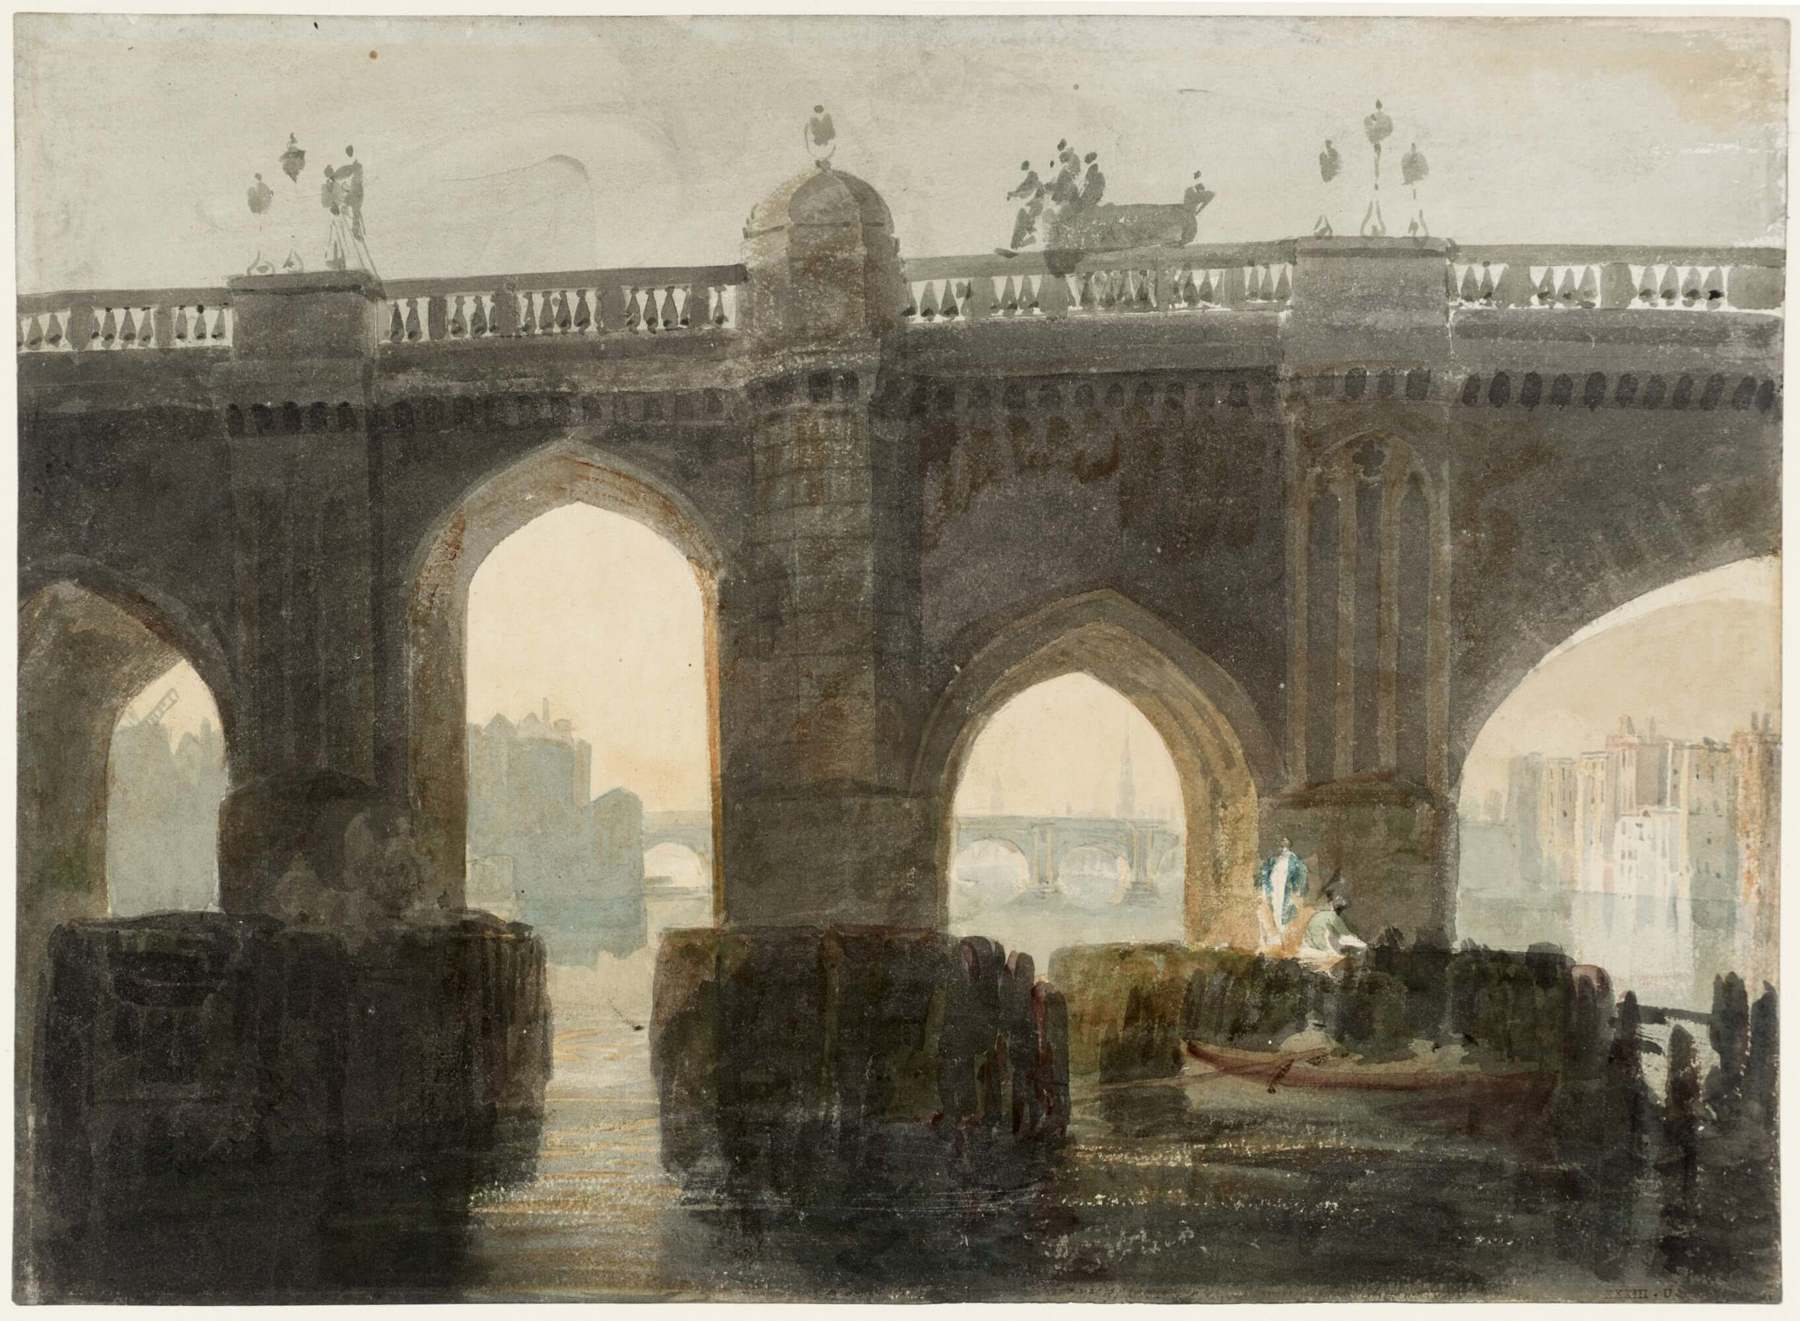 Image shows a painting of Old London Bridge by JW Turner